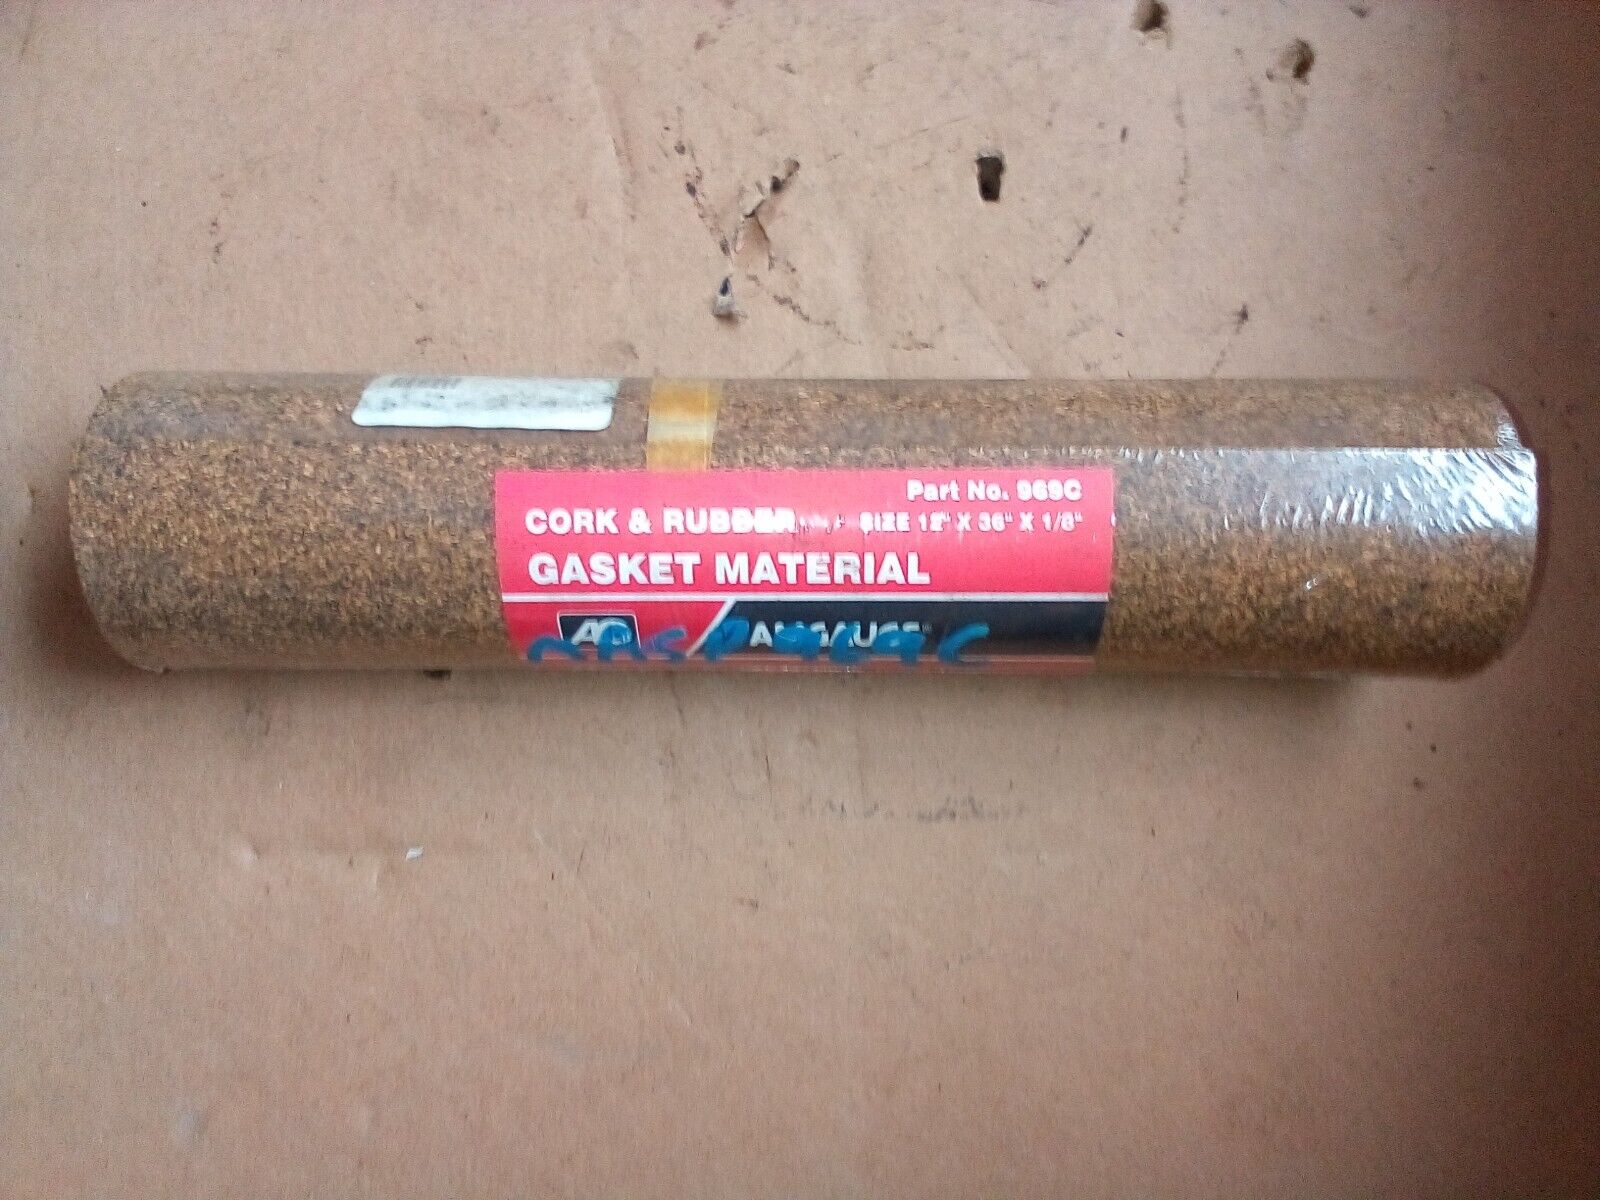 New Amguage Cork and Rubber Gasket Material 12\